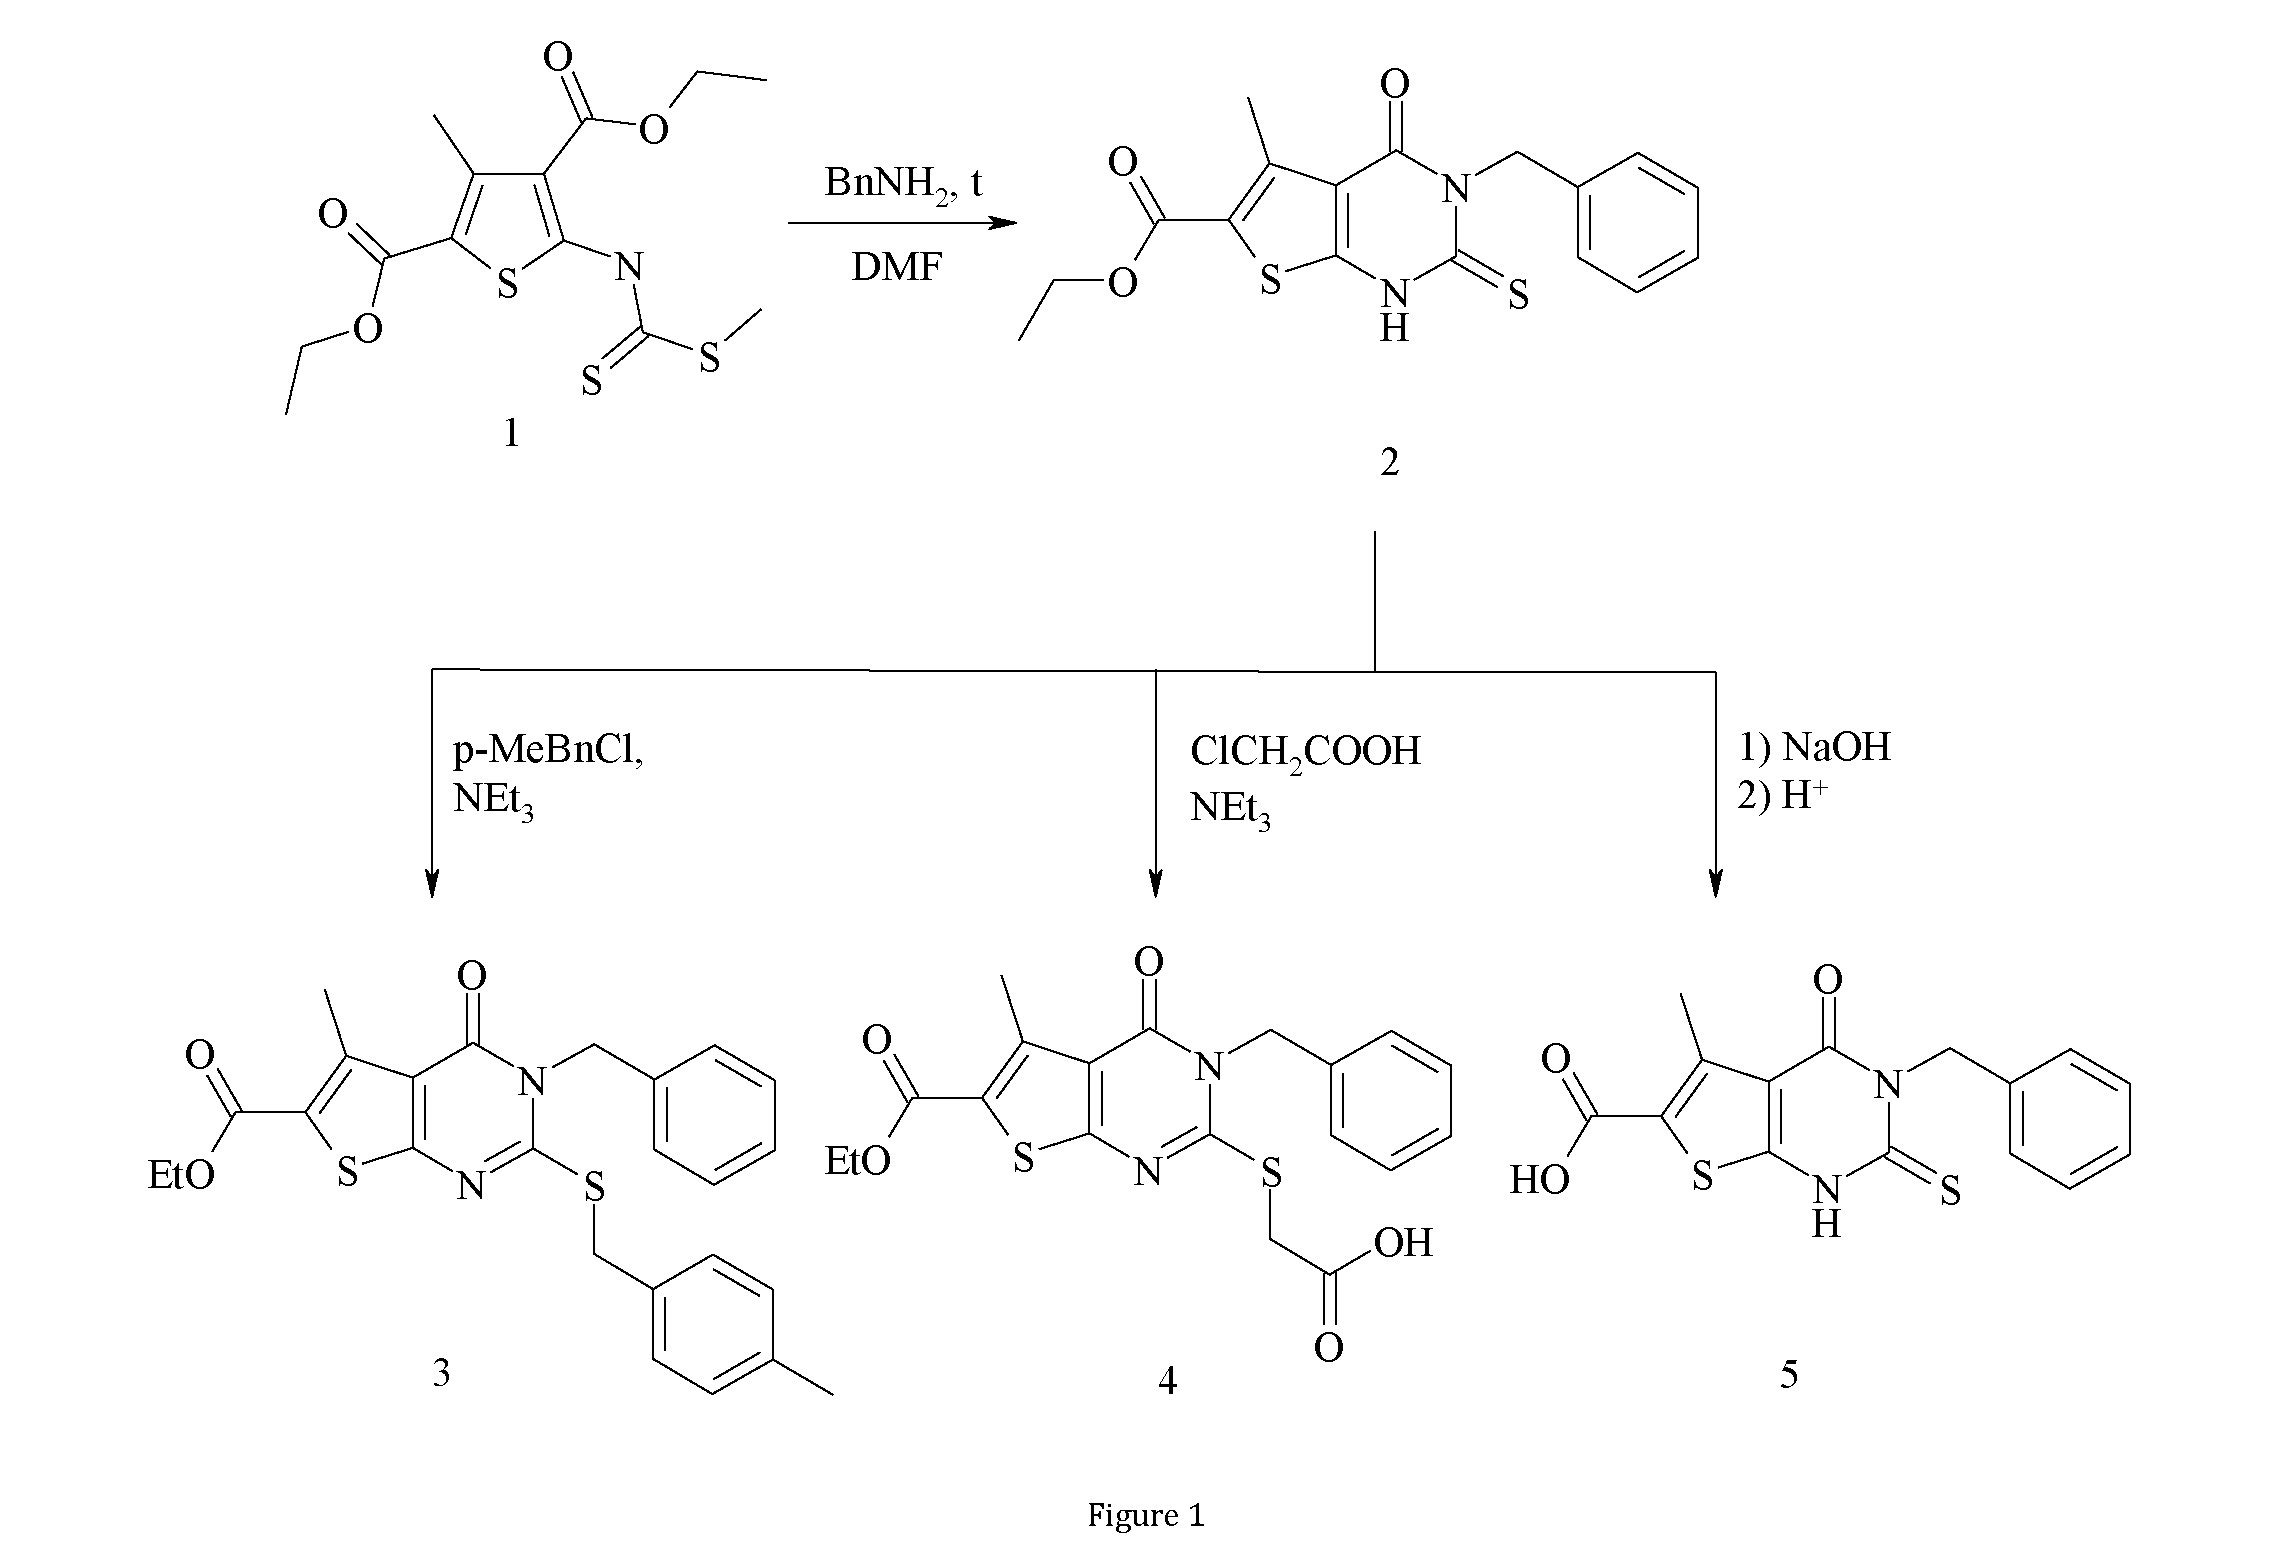 Screening study of anti-inflammatory and psychoactive properties of the derivatives of 3-benzyl-2-thio-5- methyl-4-oxo-3,4-dihydrothieno[2,3-d]pyrimidine-6-carboxylic acid